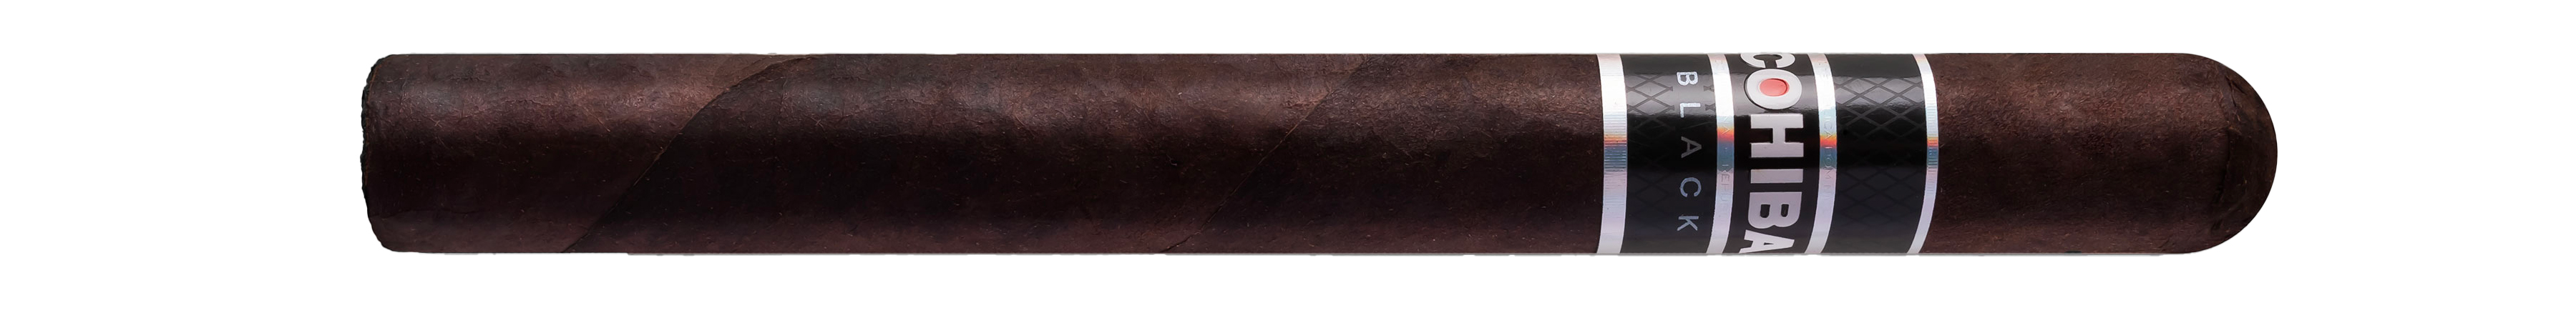 A picture of a Cohiba Black Churchill cigar with a maduro wrapper